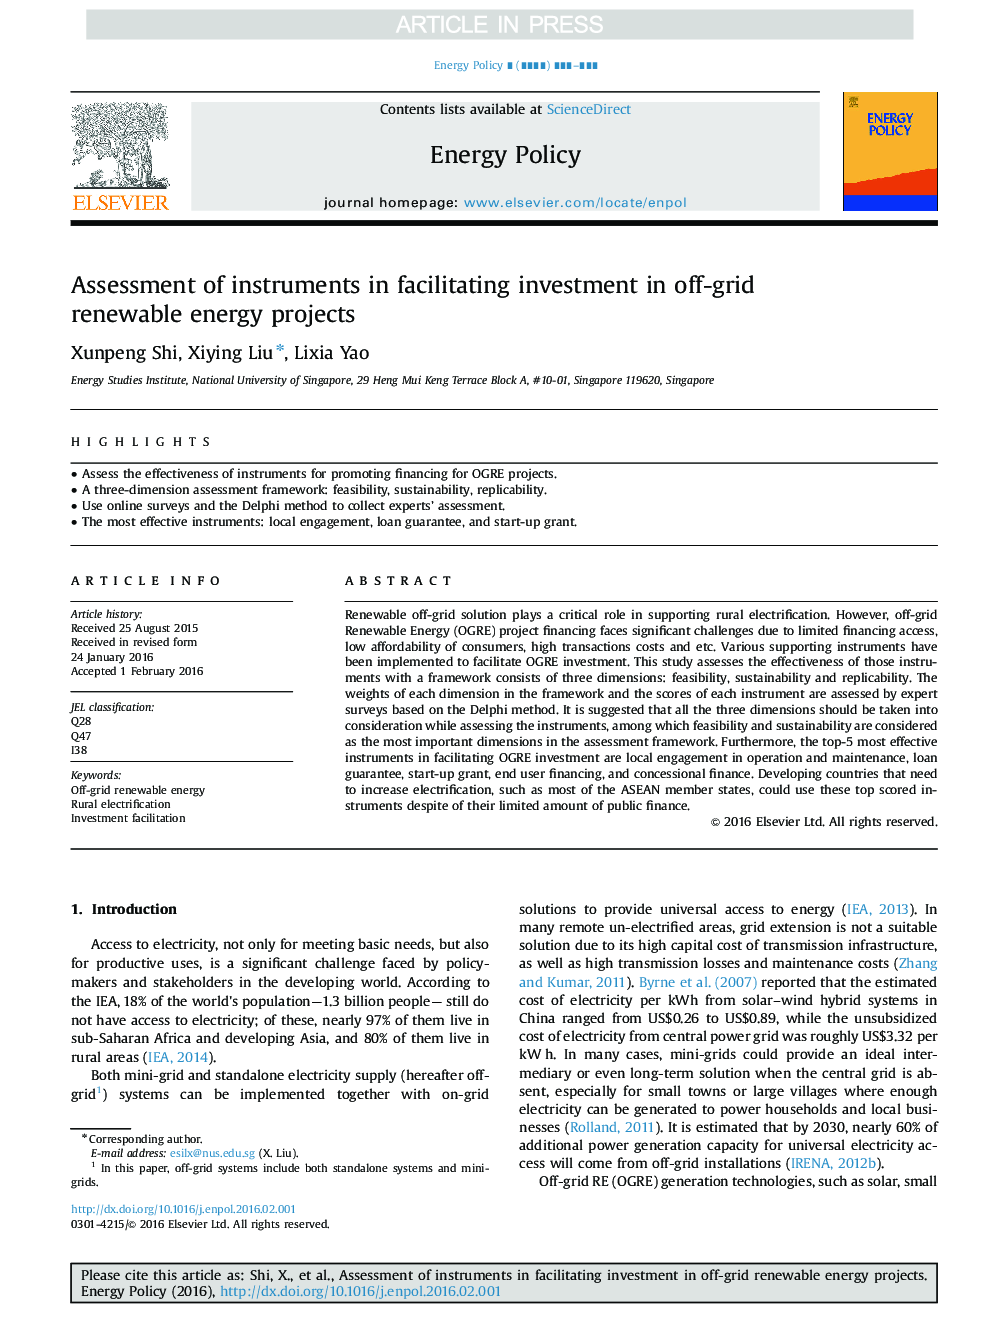 Assessment of instruments in facilitating investment in off-grid renewable energy projects